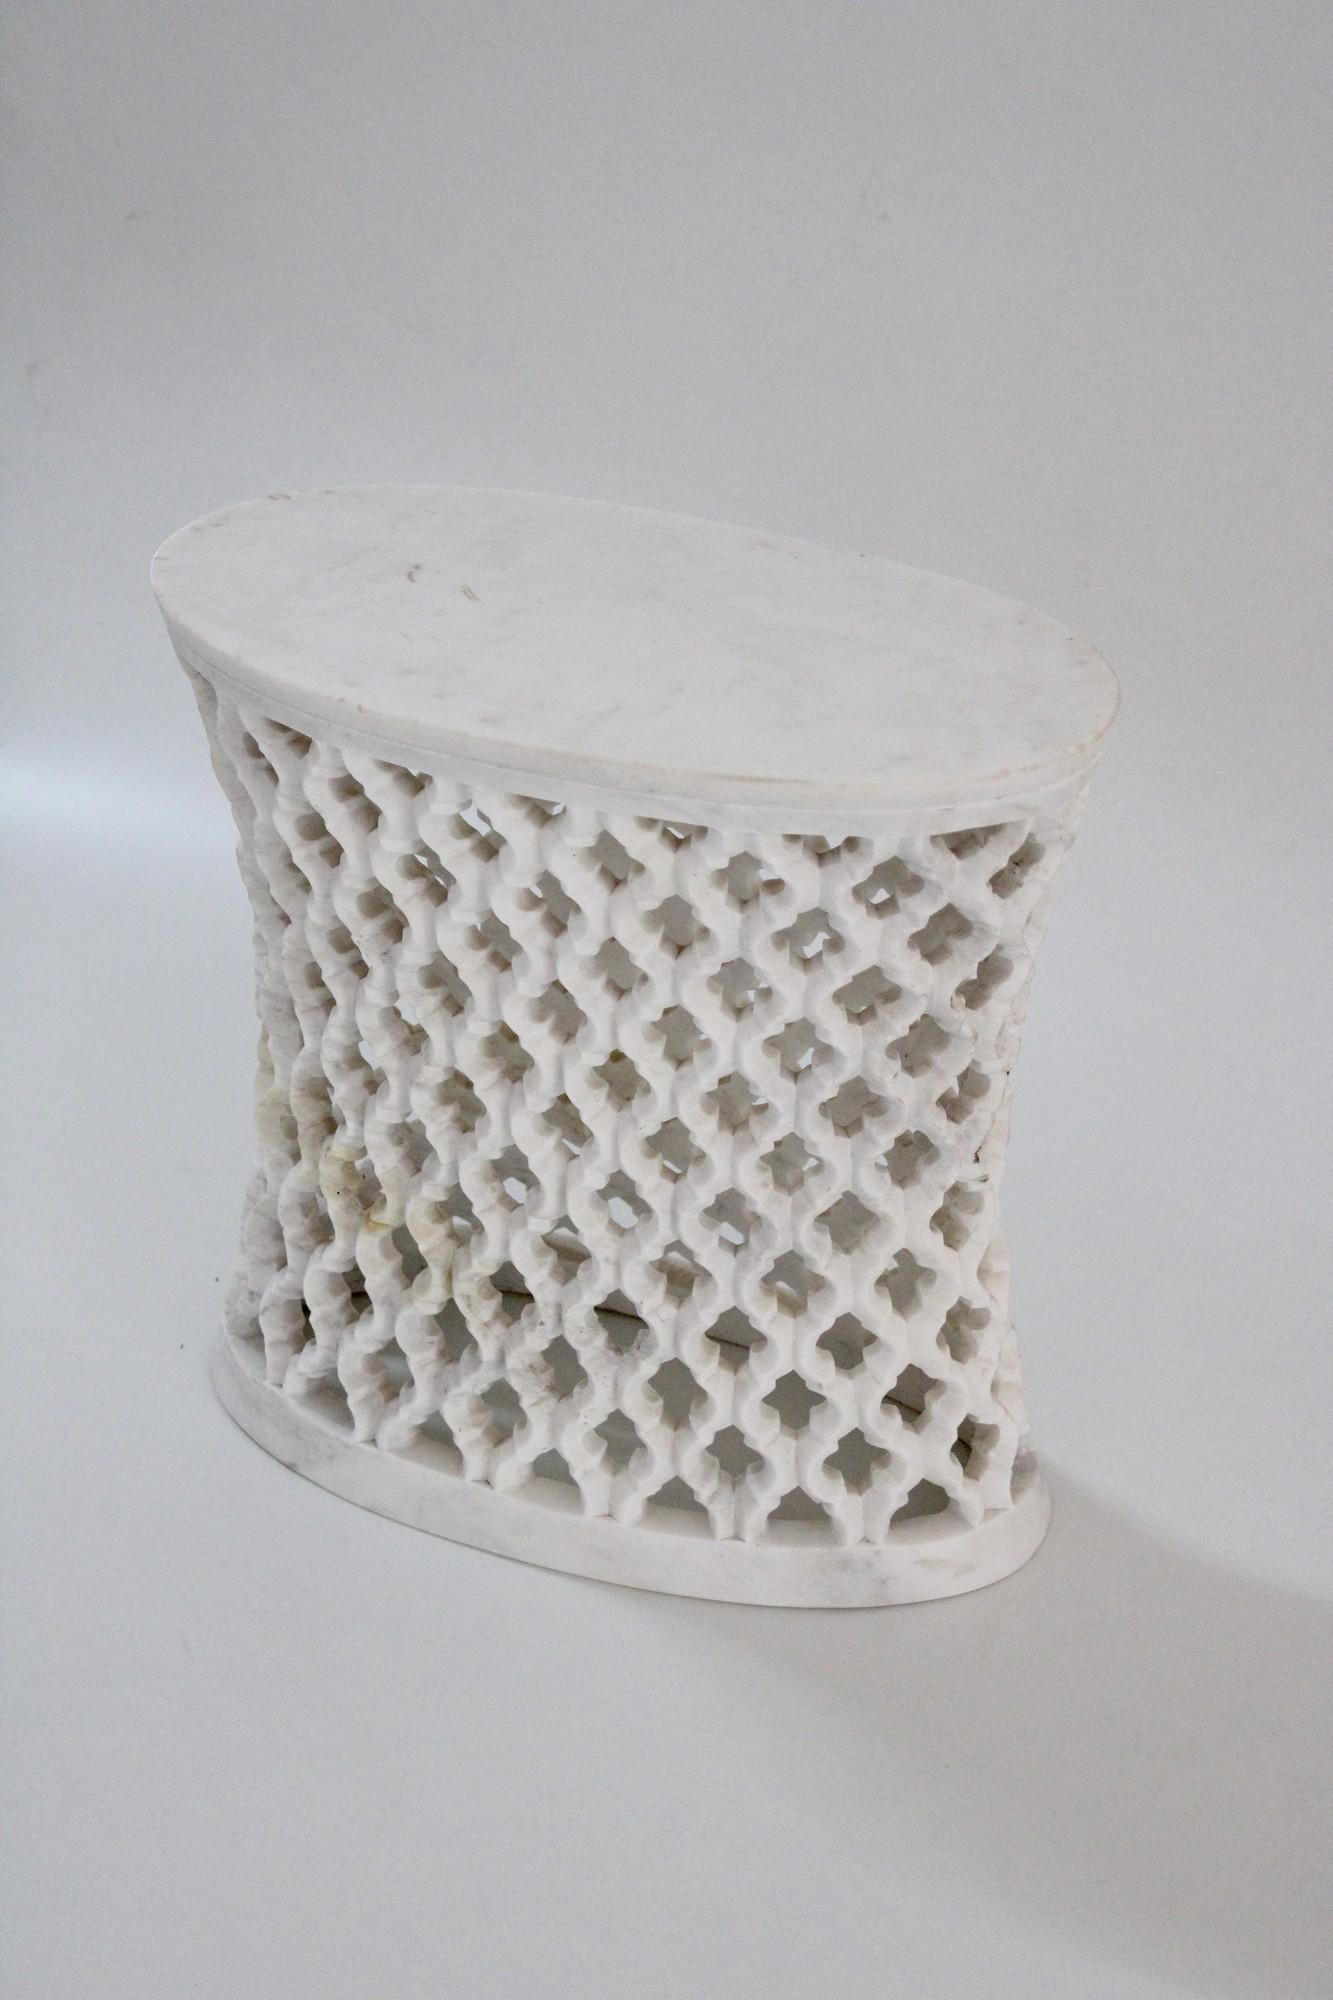 Inspired by the elegant pierced marble “jali” screens and windows he saw in the palaces of Mughal India, the renowned designer Paul Mathieu created a unique collection of hand carved side table.
 
Solid blocks of marble are hollowed out and hand